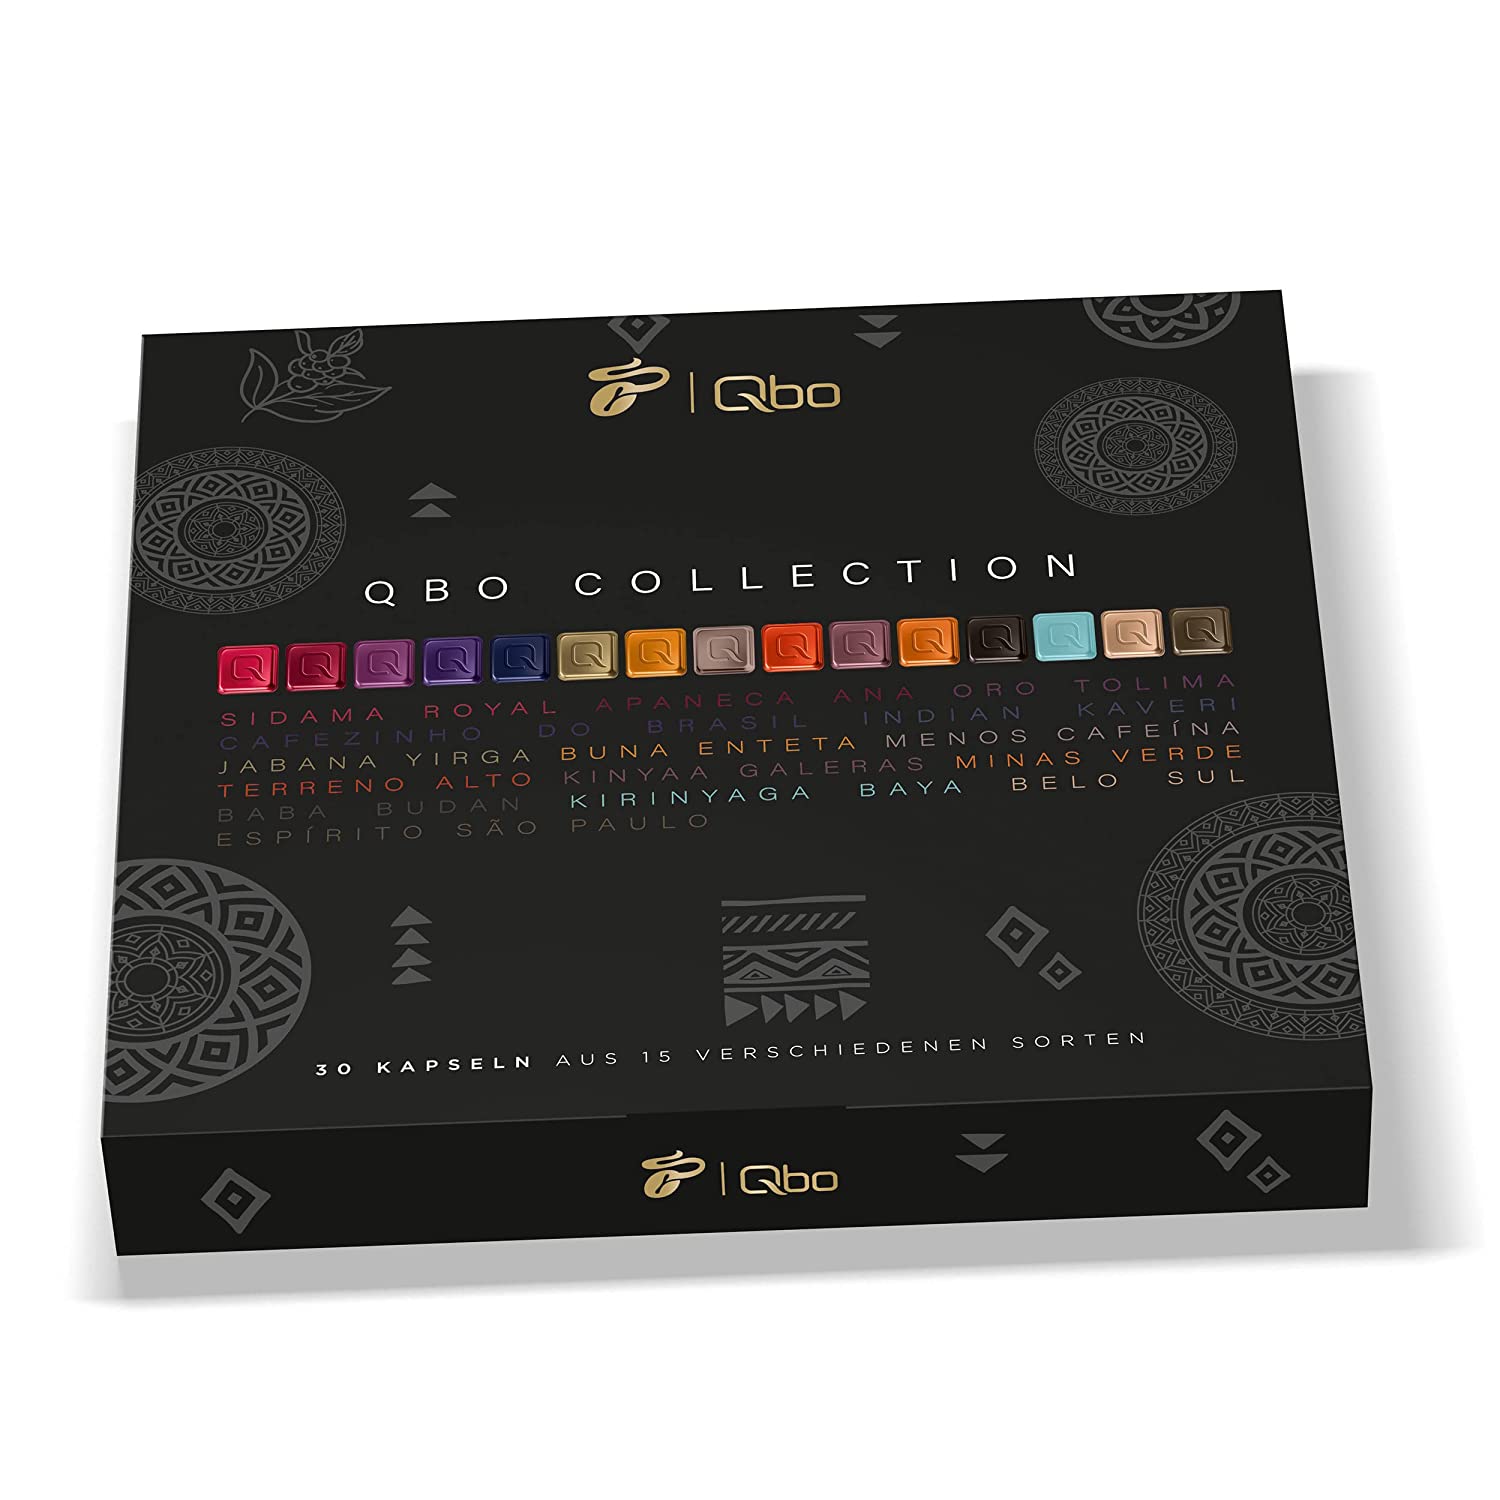 Tchibo QBO Collection coffee capsules, capsule collection with 30 individual capsules, all QBO coffee types, as a trial box or gift box, sustainable & fair trade